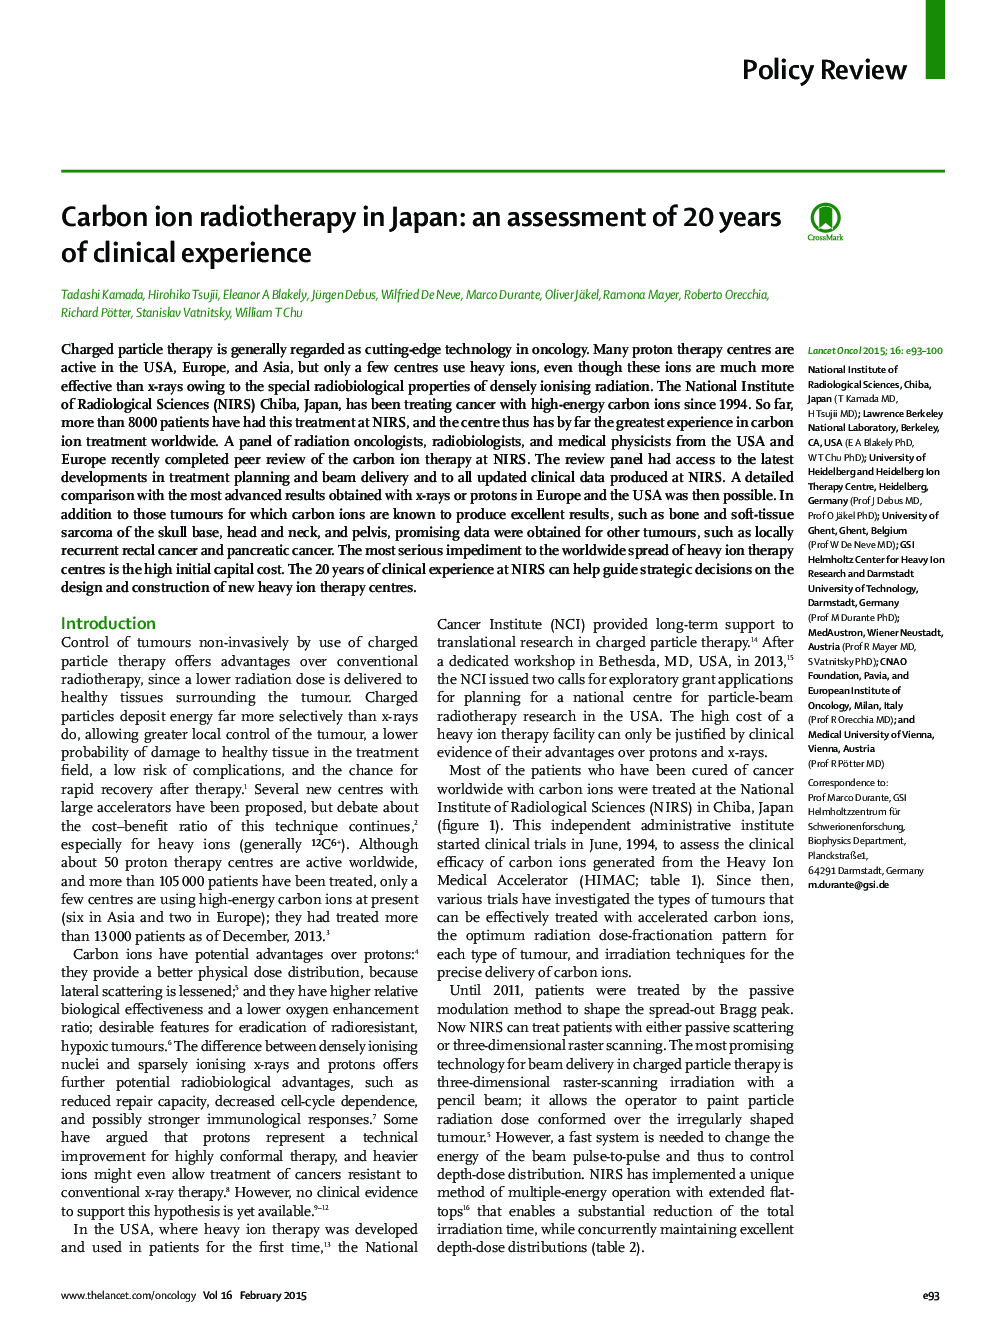 Carbon ion radiotherapy in Japan: an assessment of 20 years of clinical experience